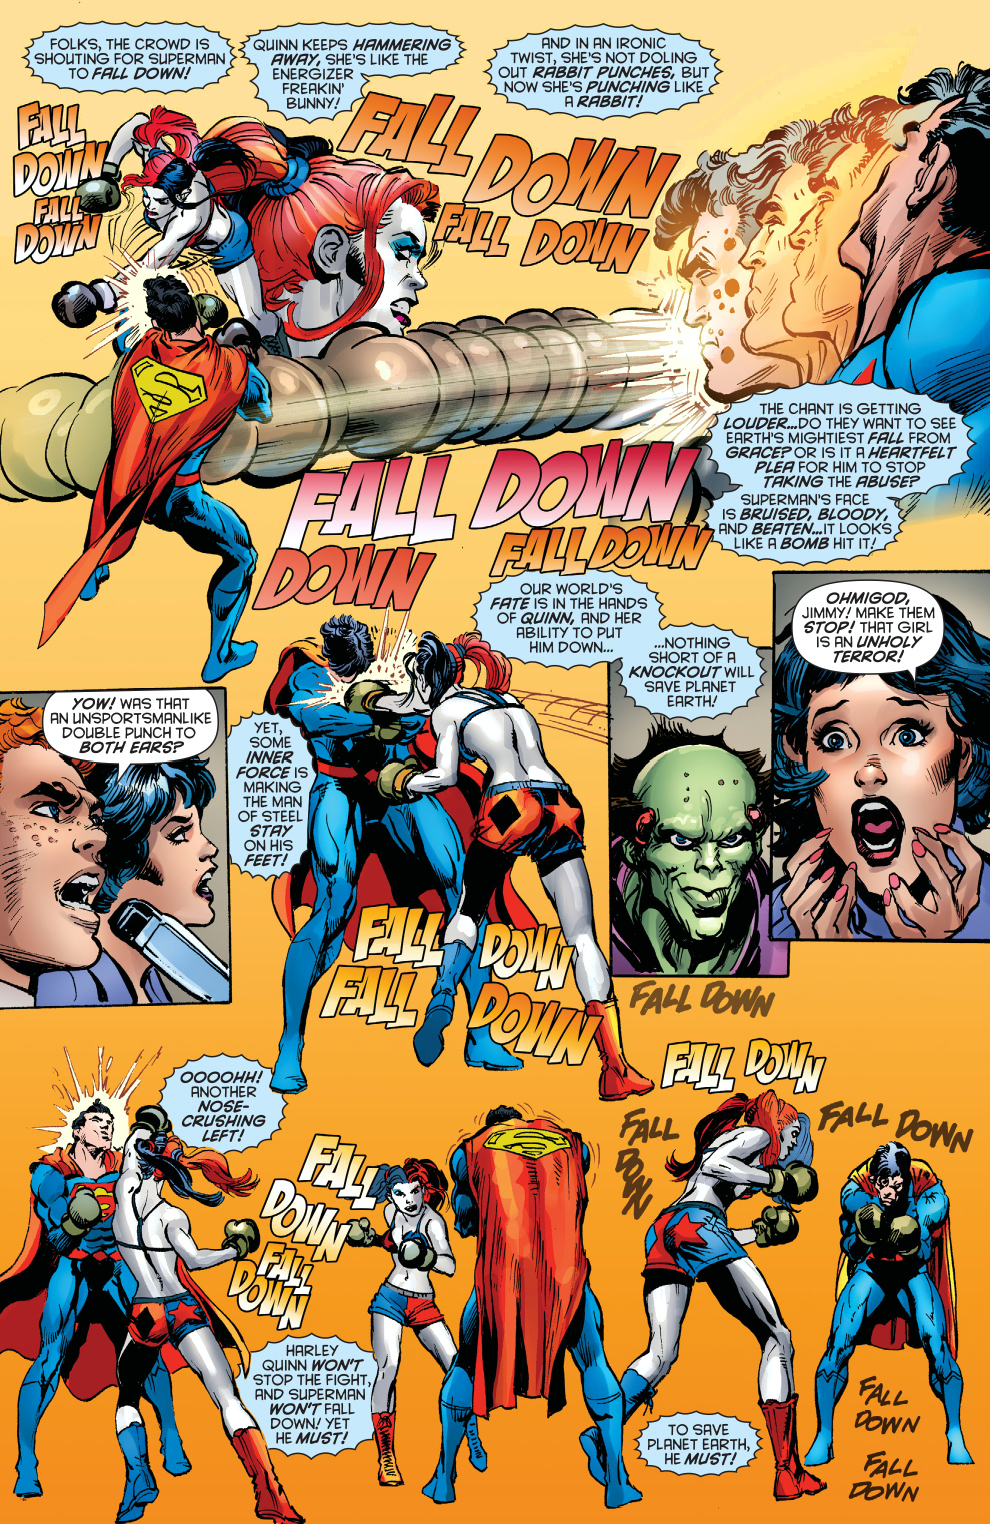 harley-quinn-vs-superman-in-a-boxing-match